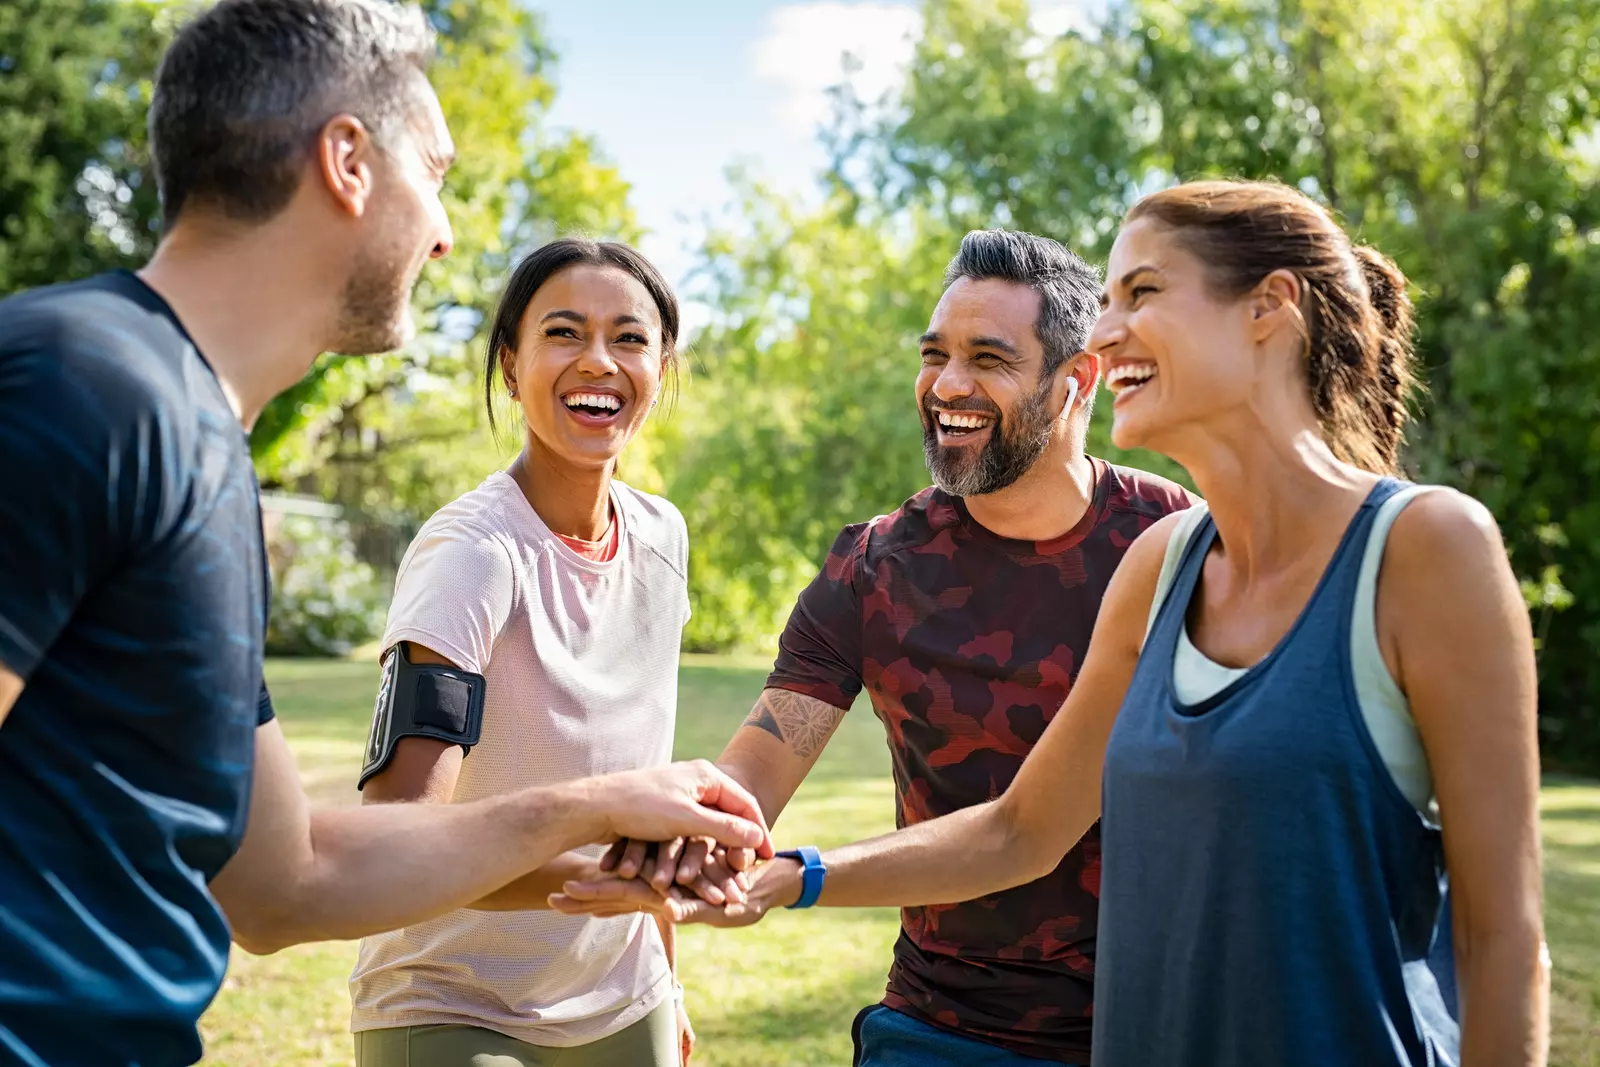 Group of active mature friends in park stacking hands after workout - stock photo